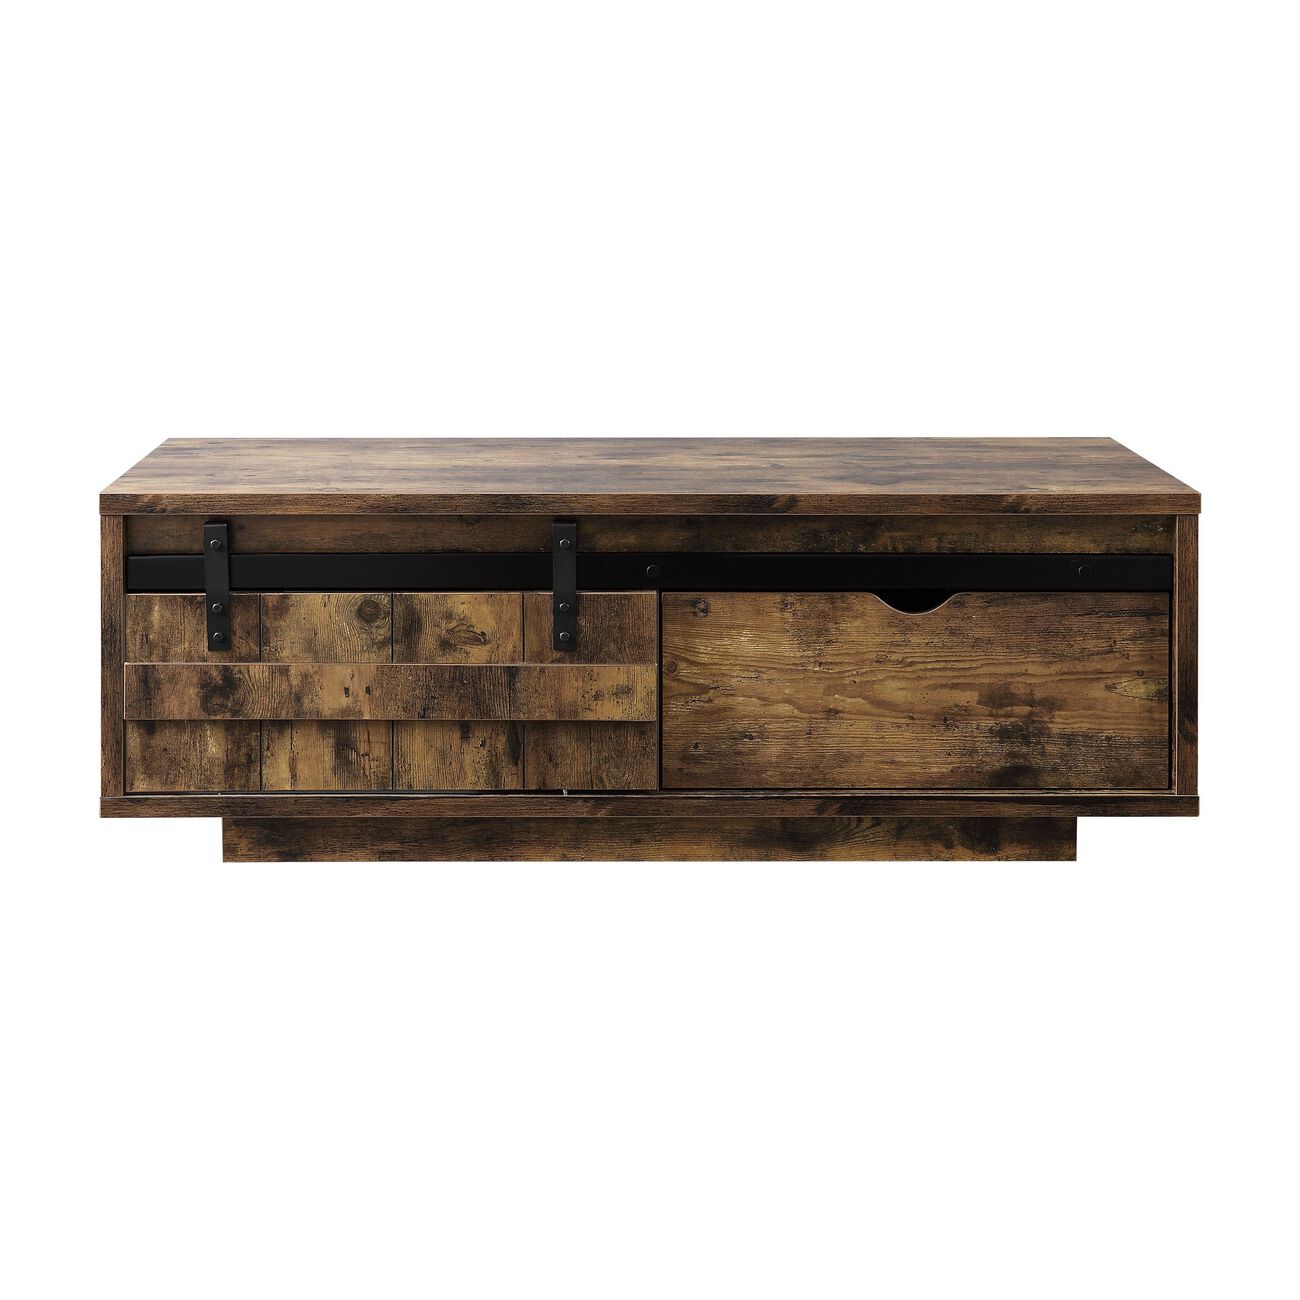 Sliding Barn Door Wooden Coffee Table with Rough Hewn Saw Texture, Brown